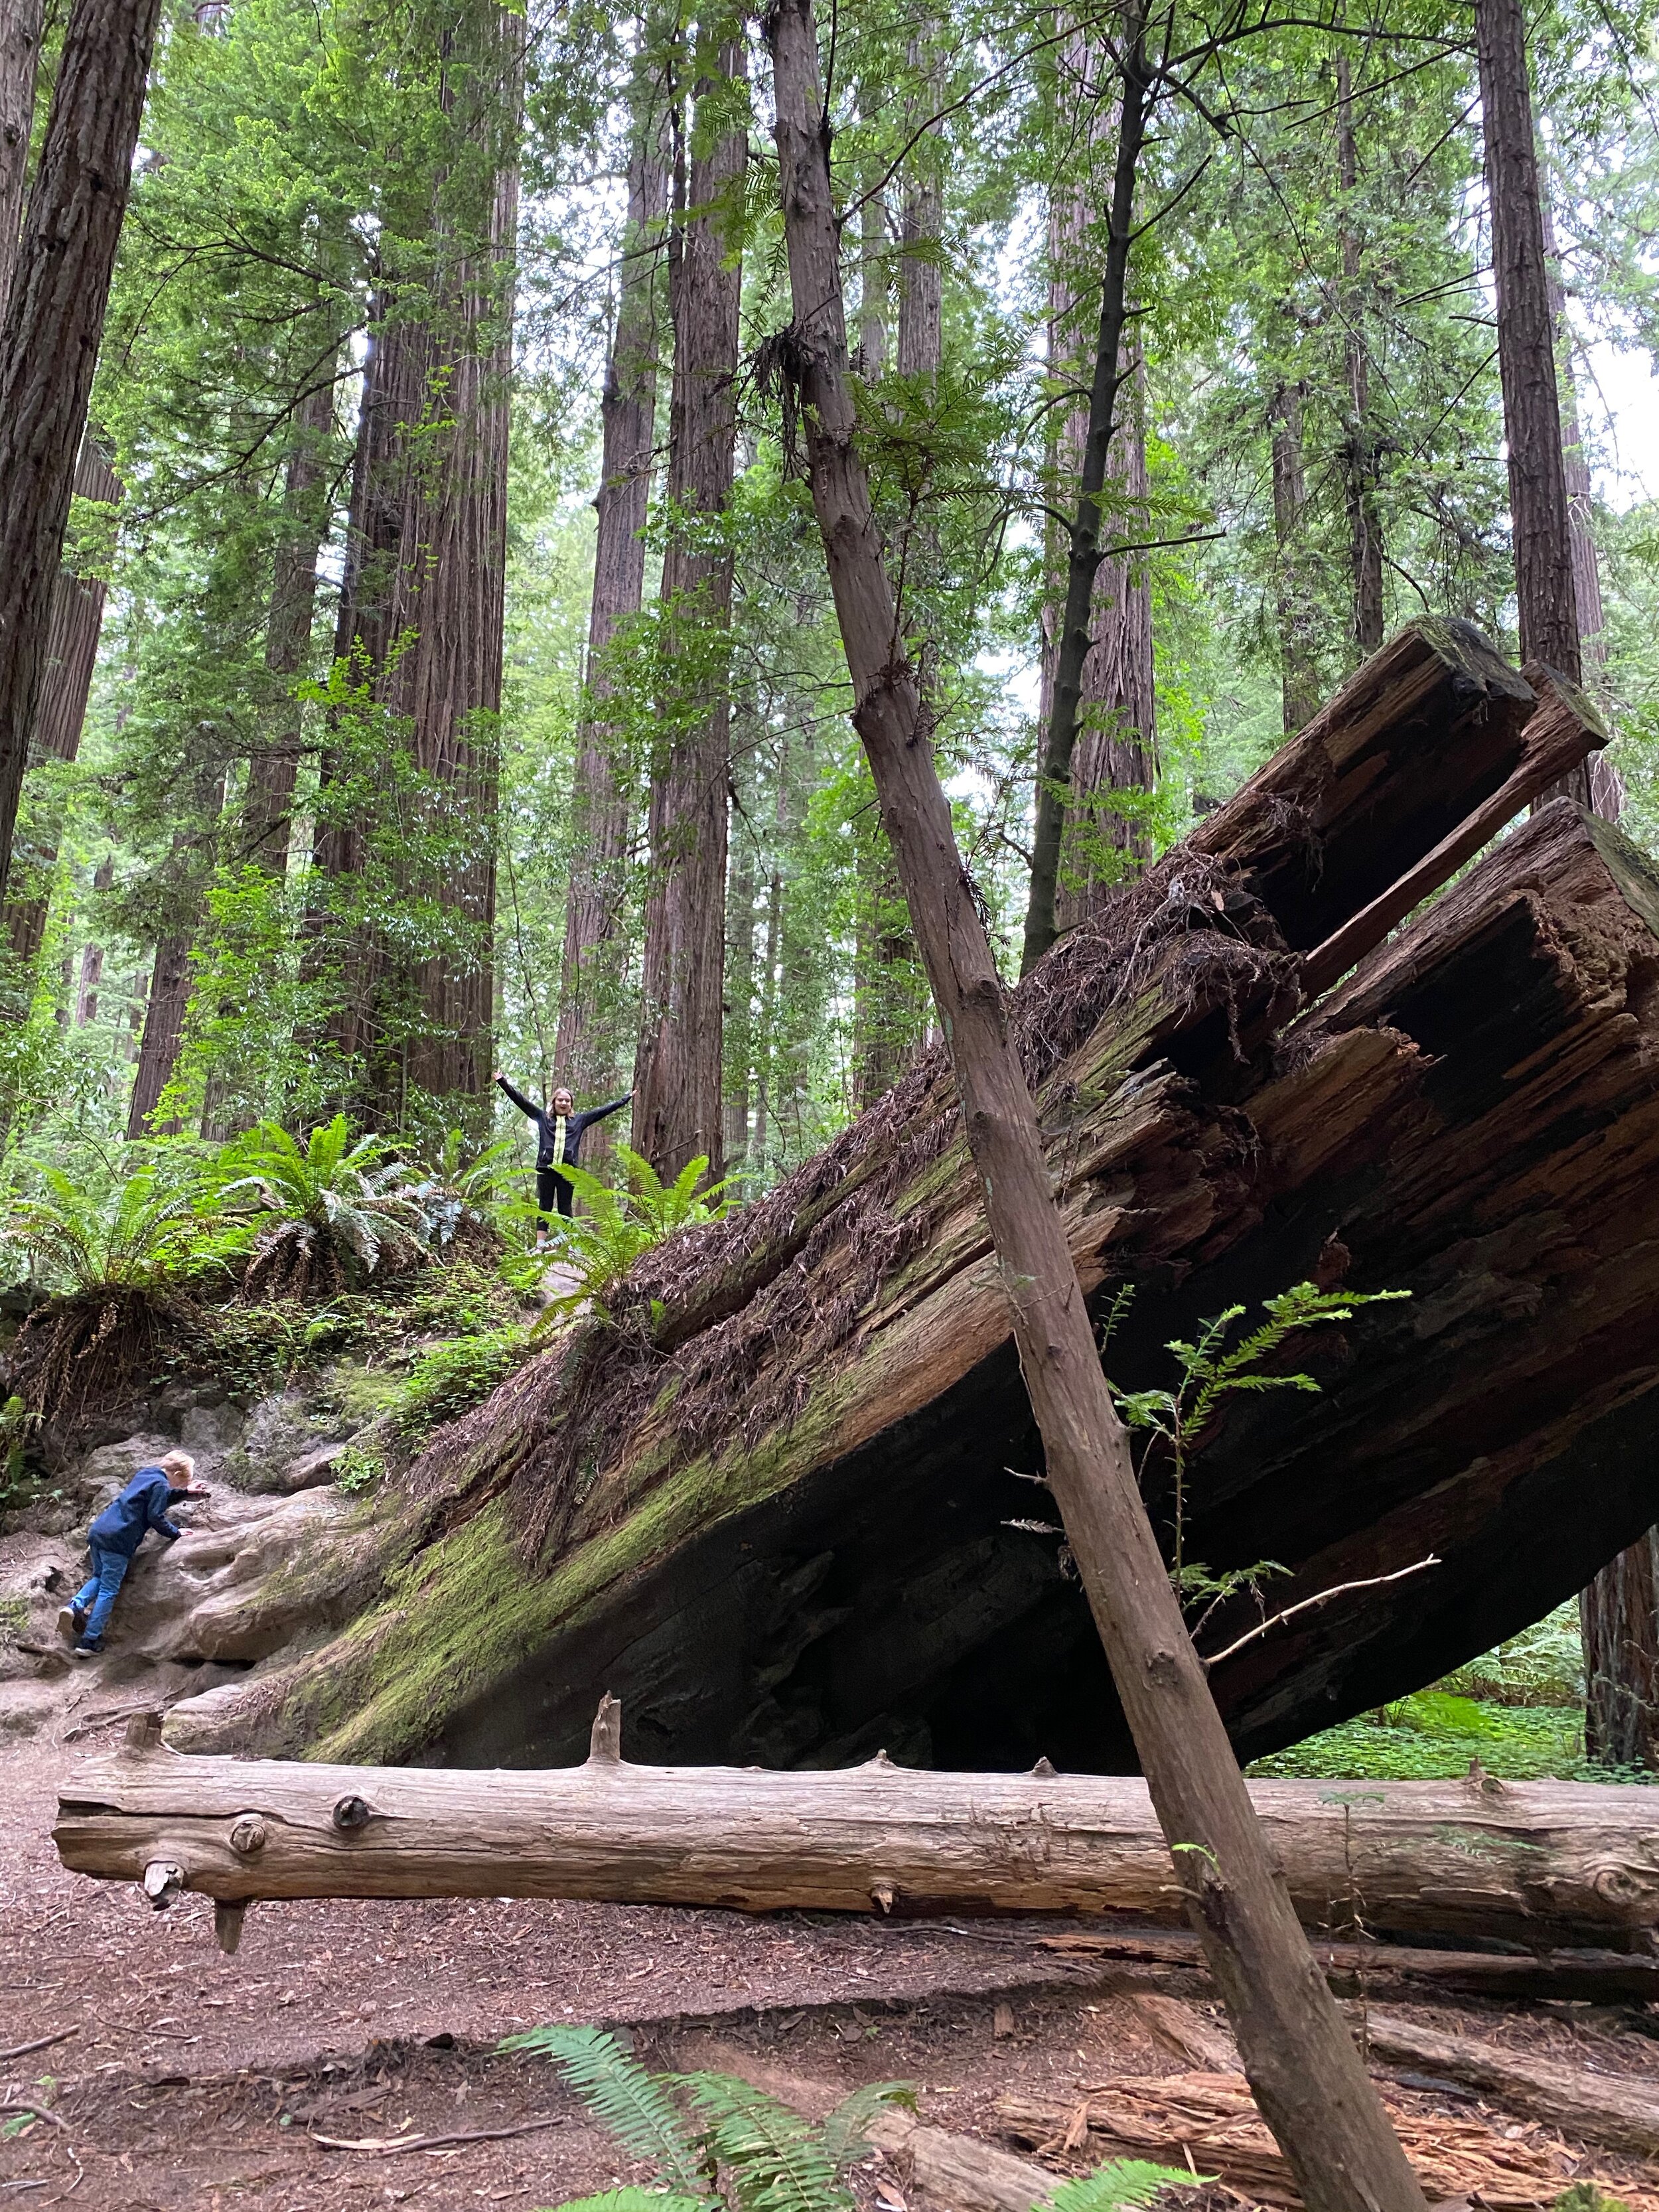 The kids climb up the roots of another downed redwood